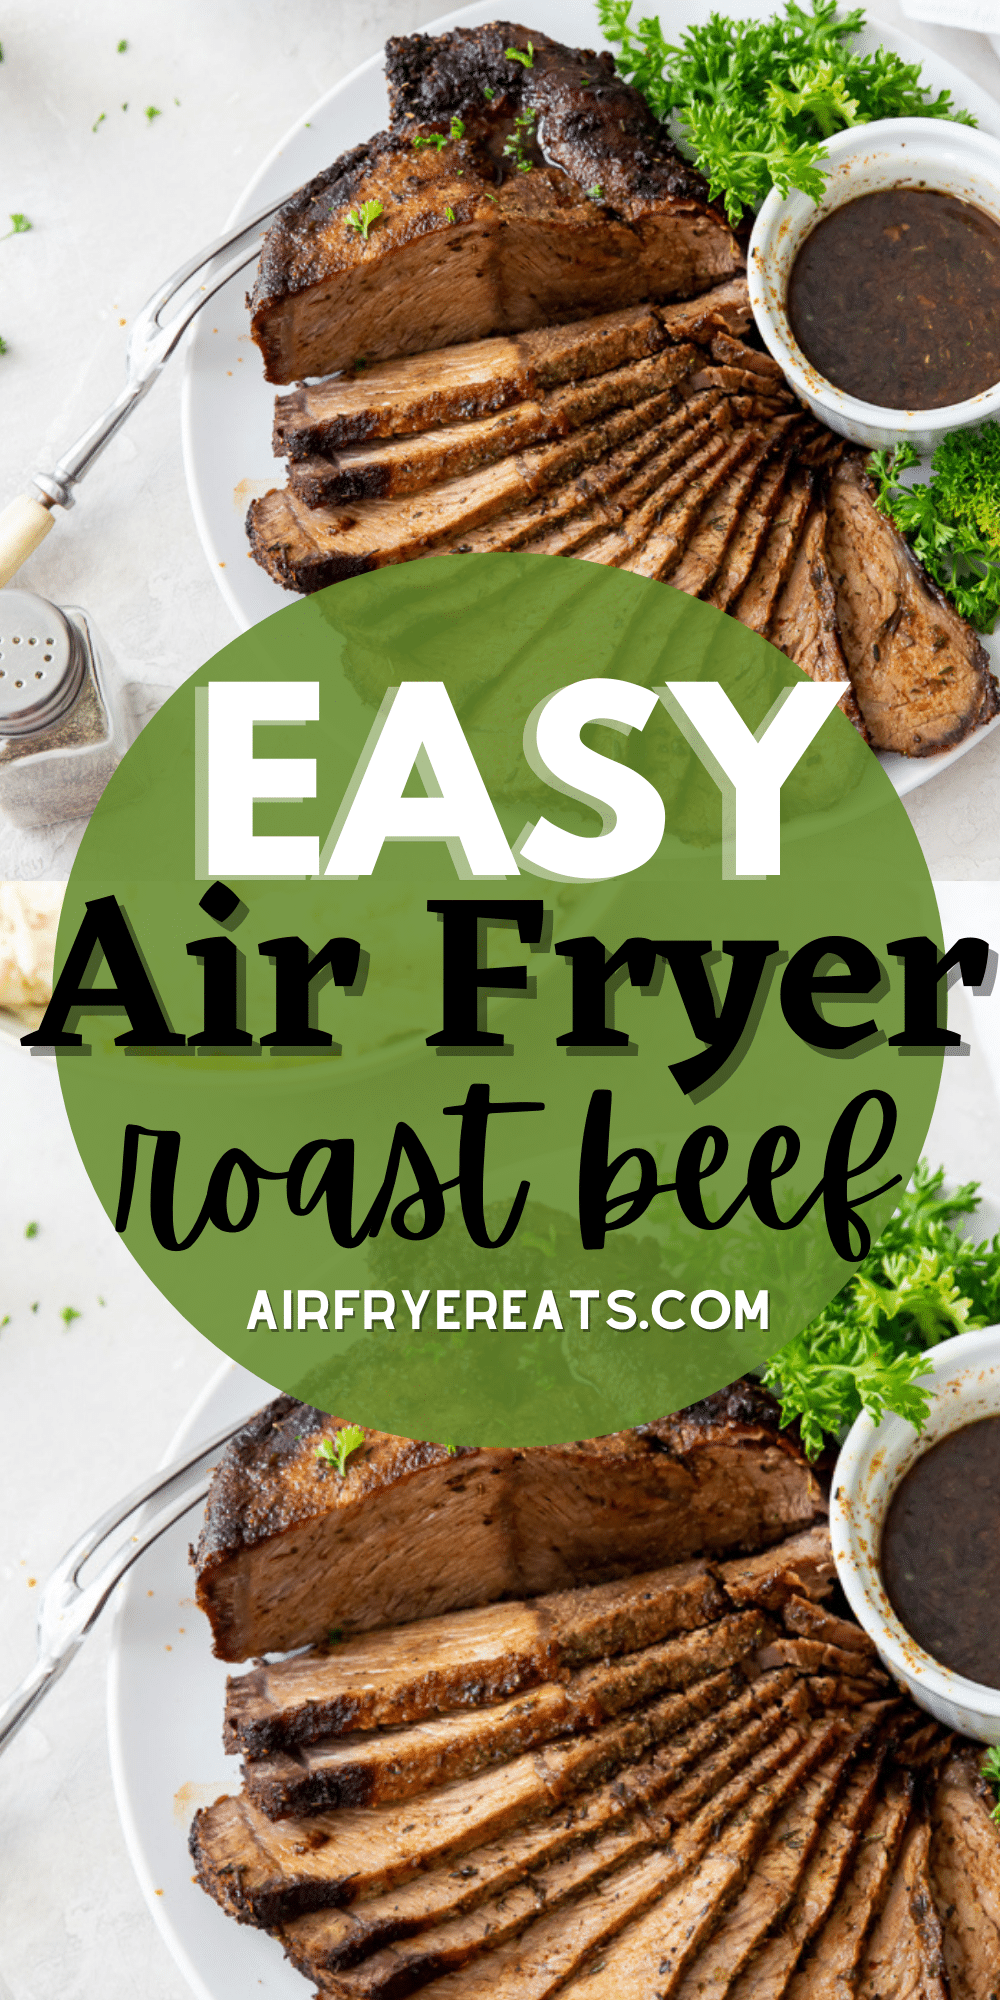 images of air fryer roast beef with text overlay